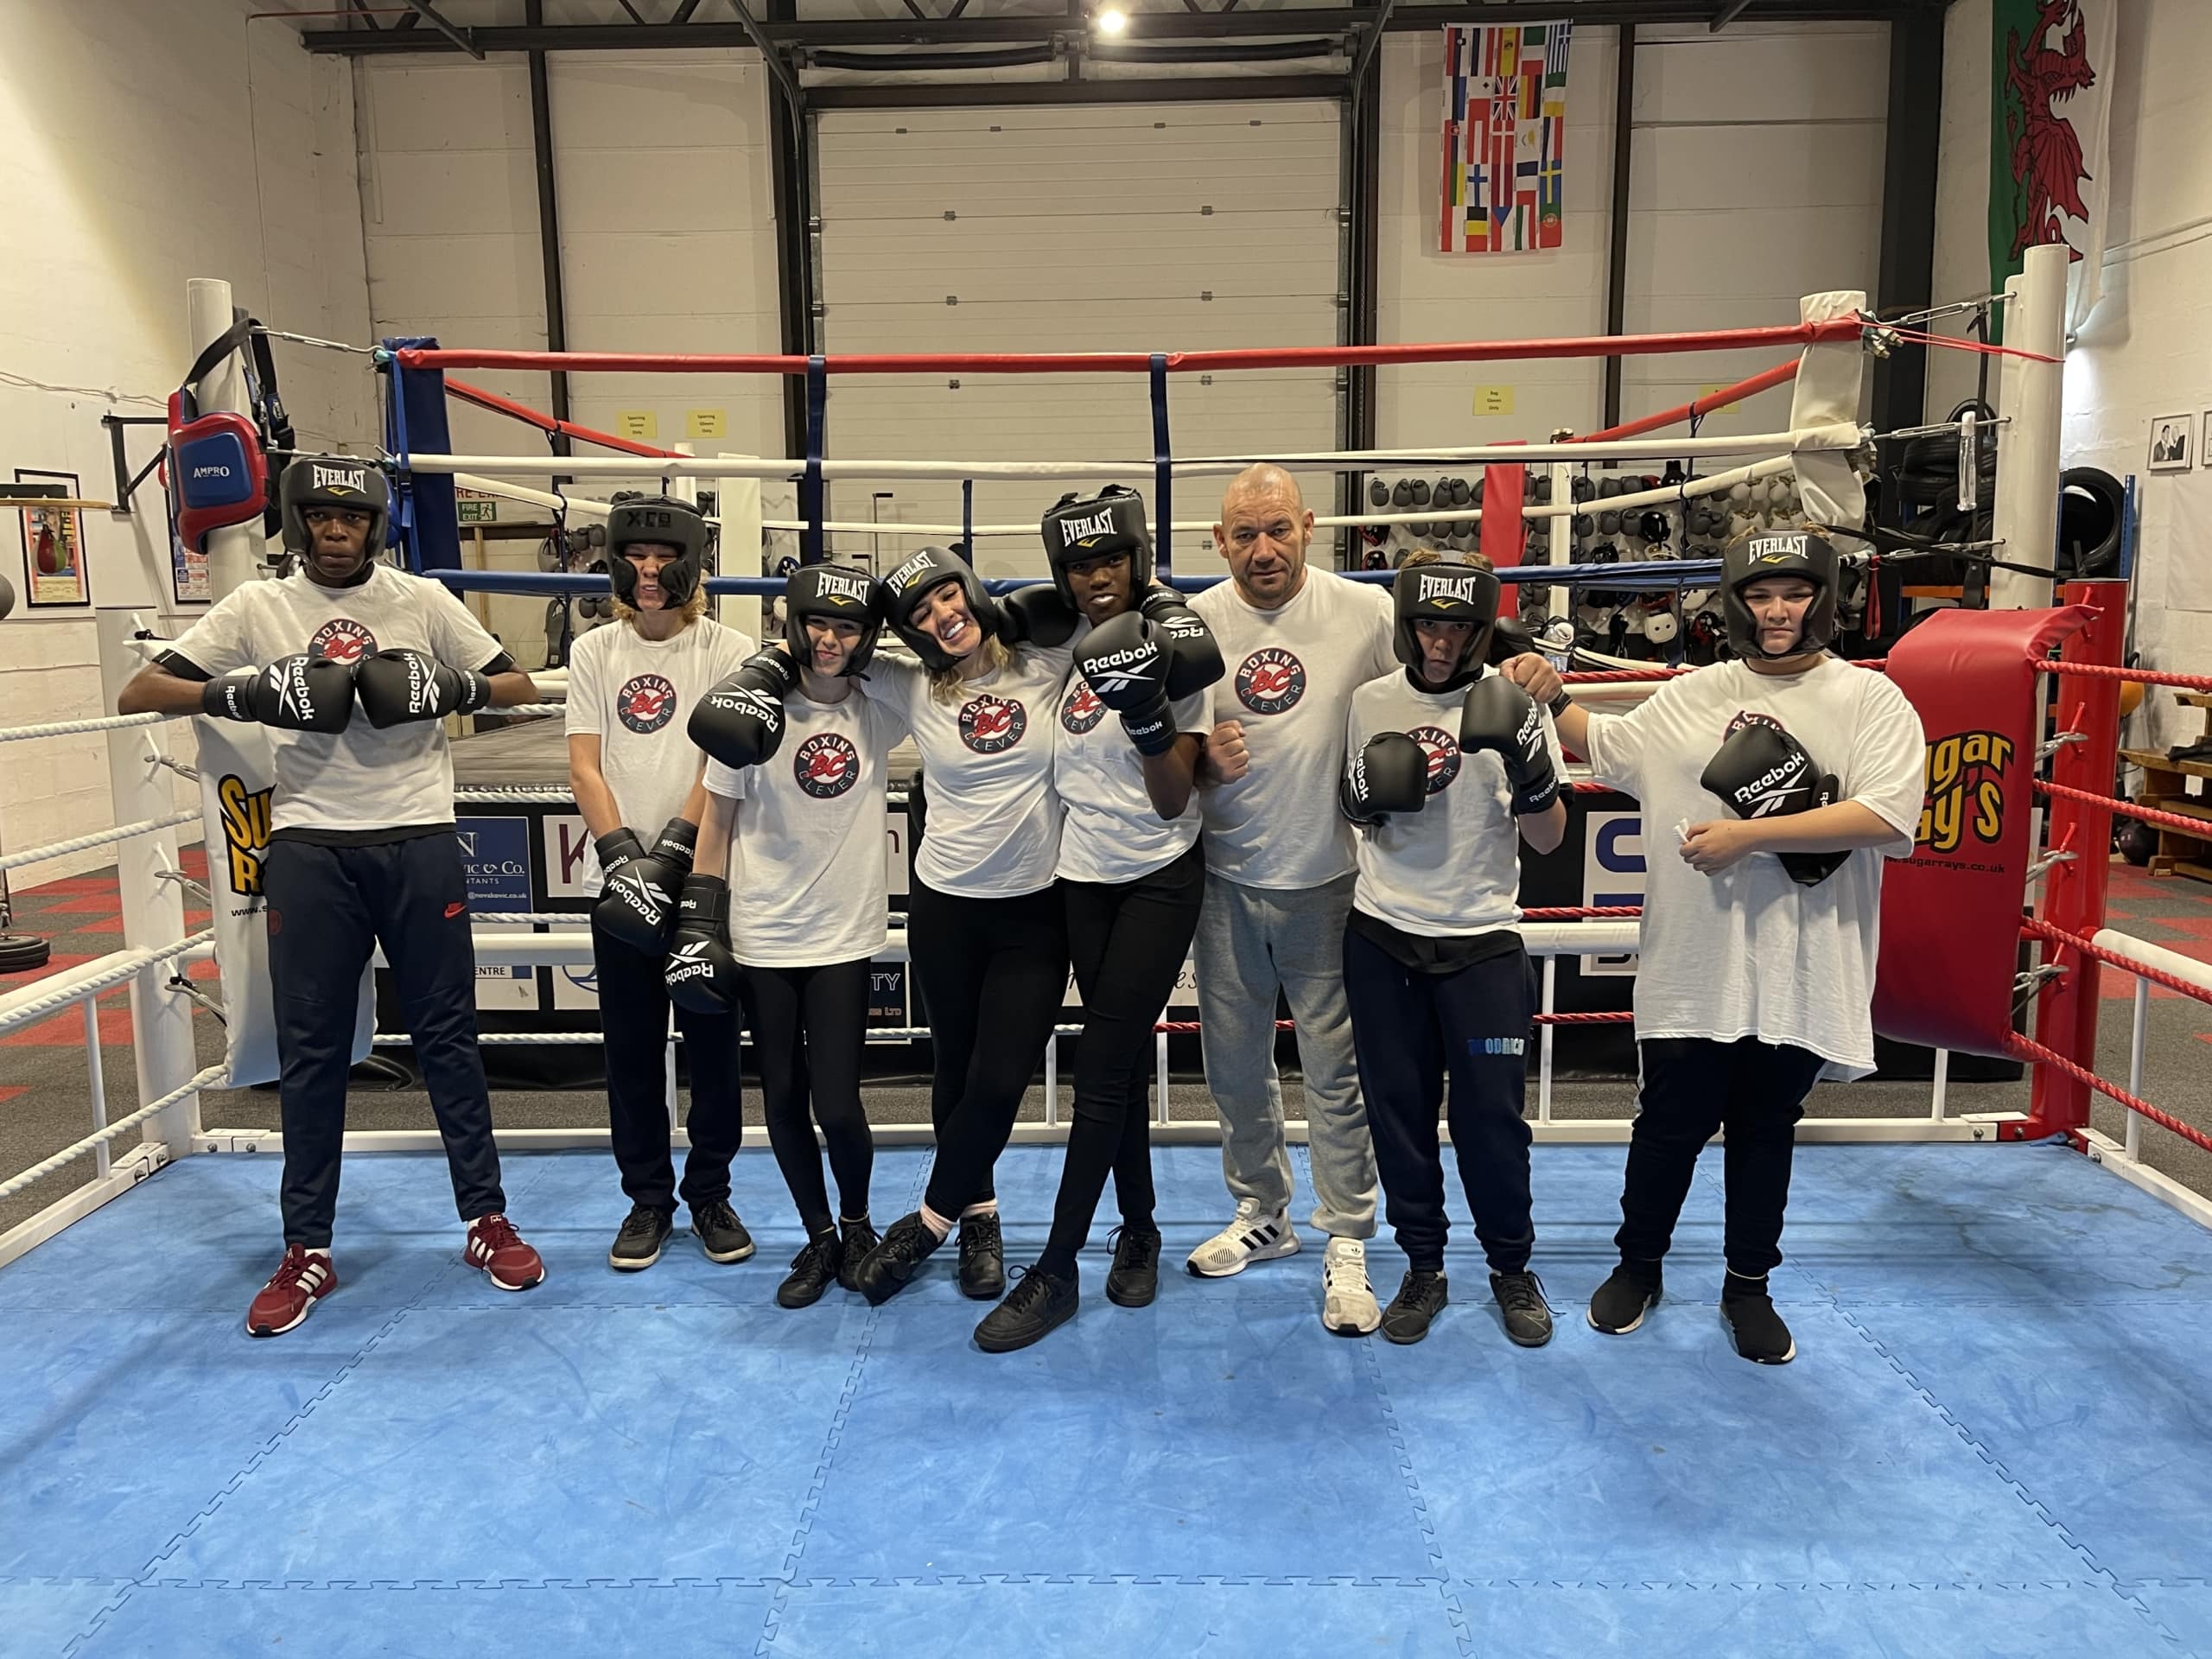 group of young people in tshirts and boxing head guard and gloves standing in a blue boxing ring